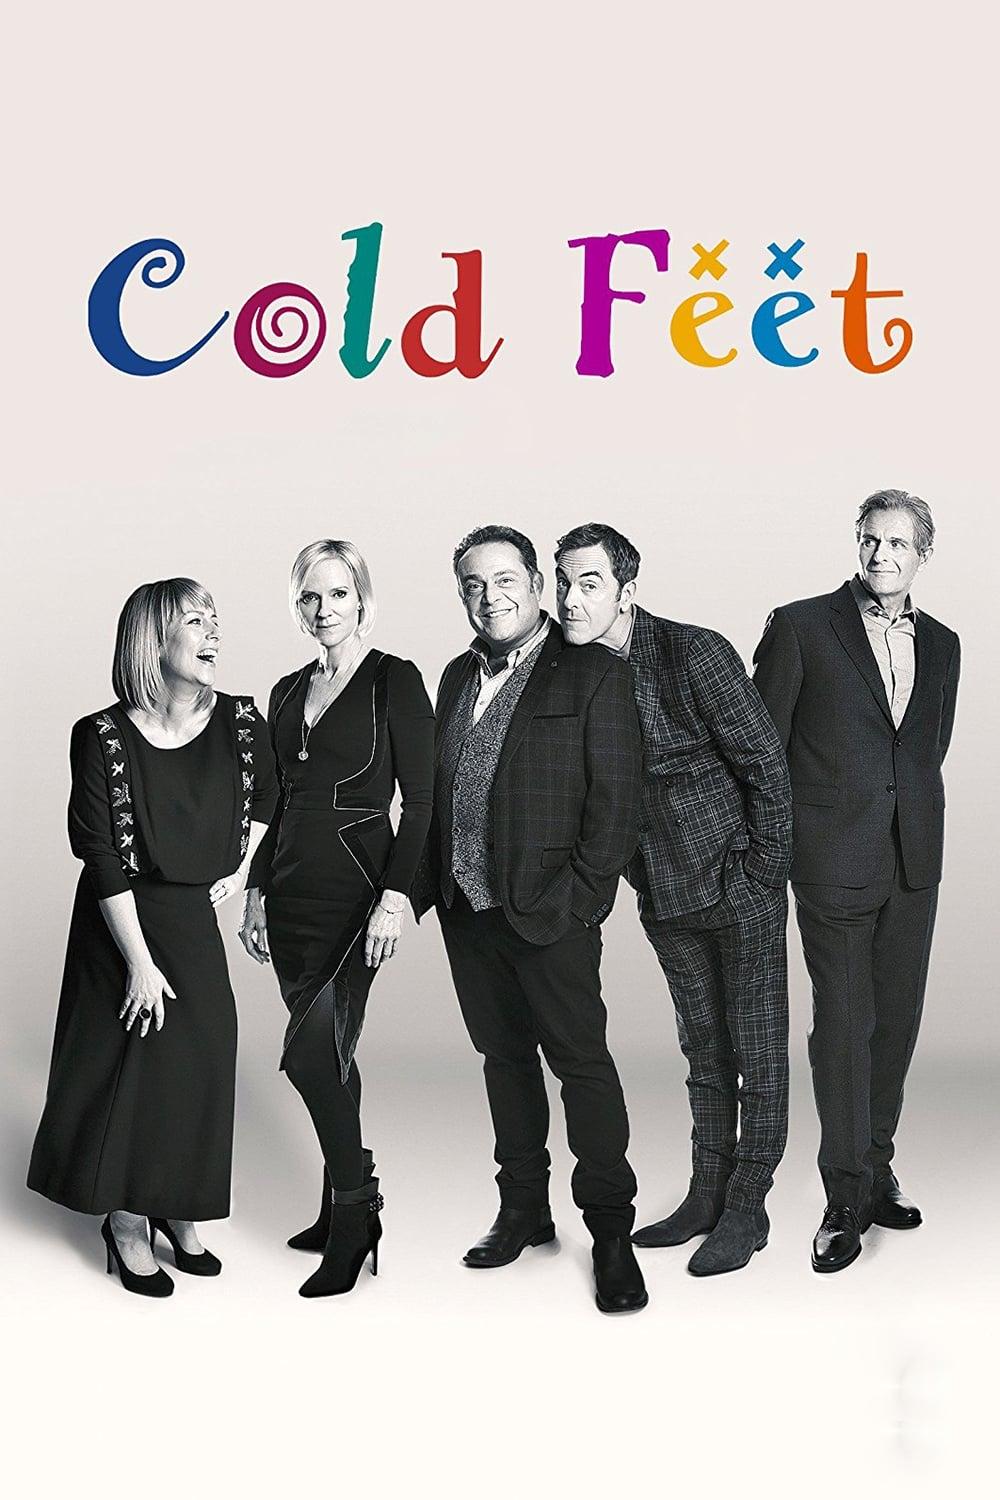 Cold Feet poster